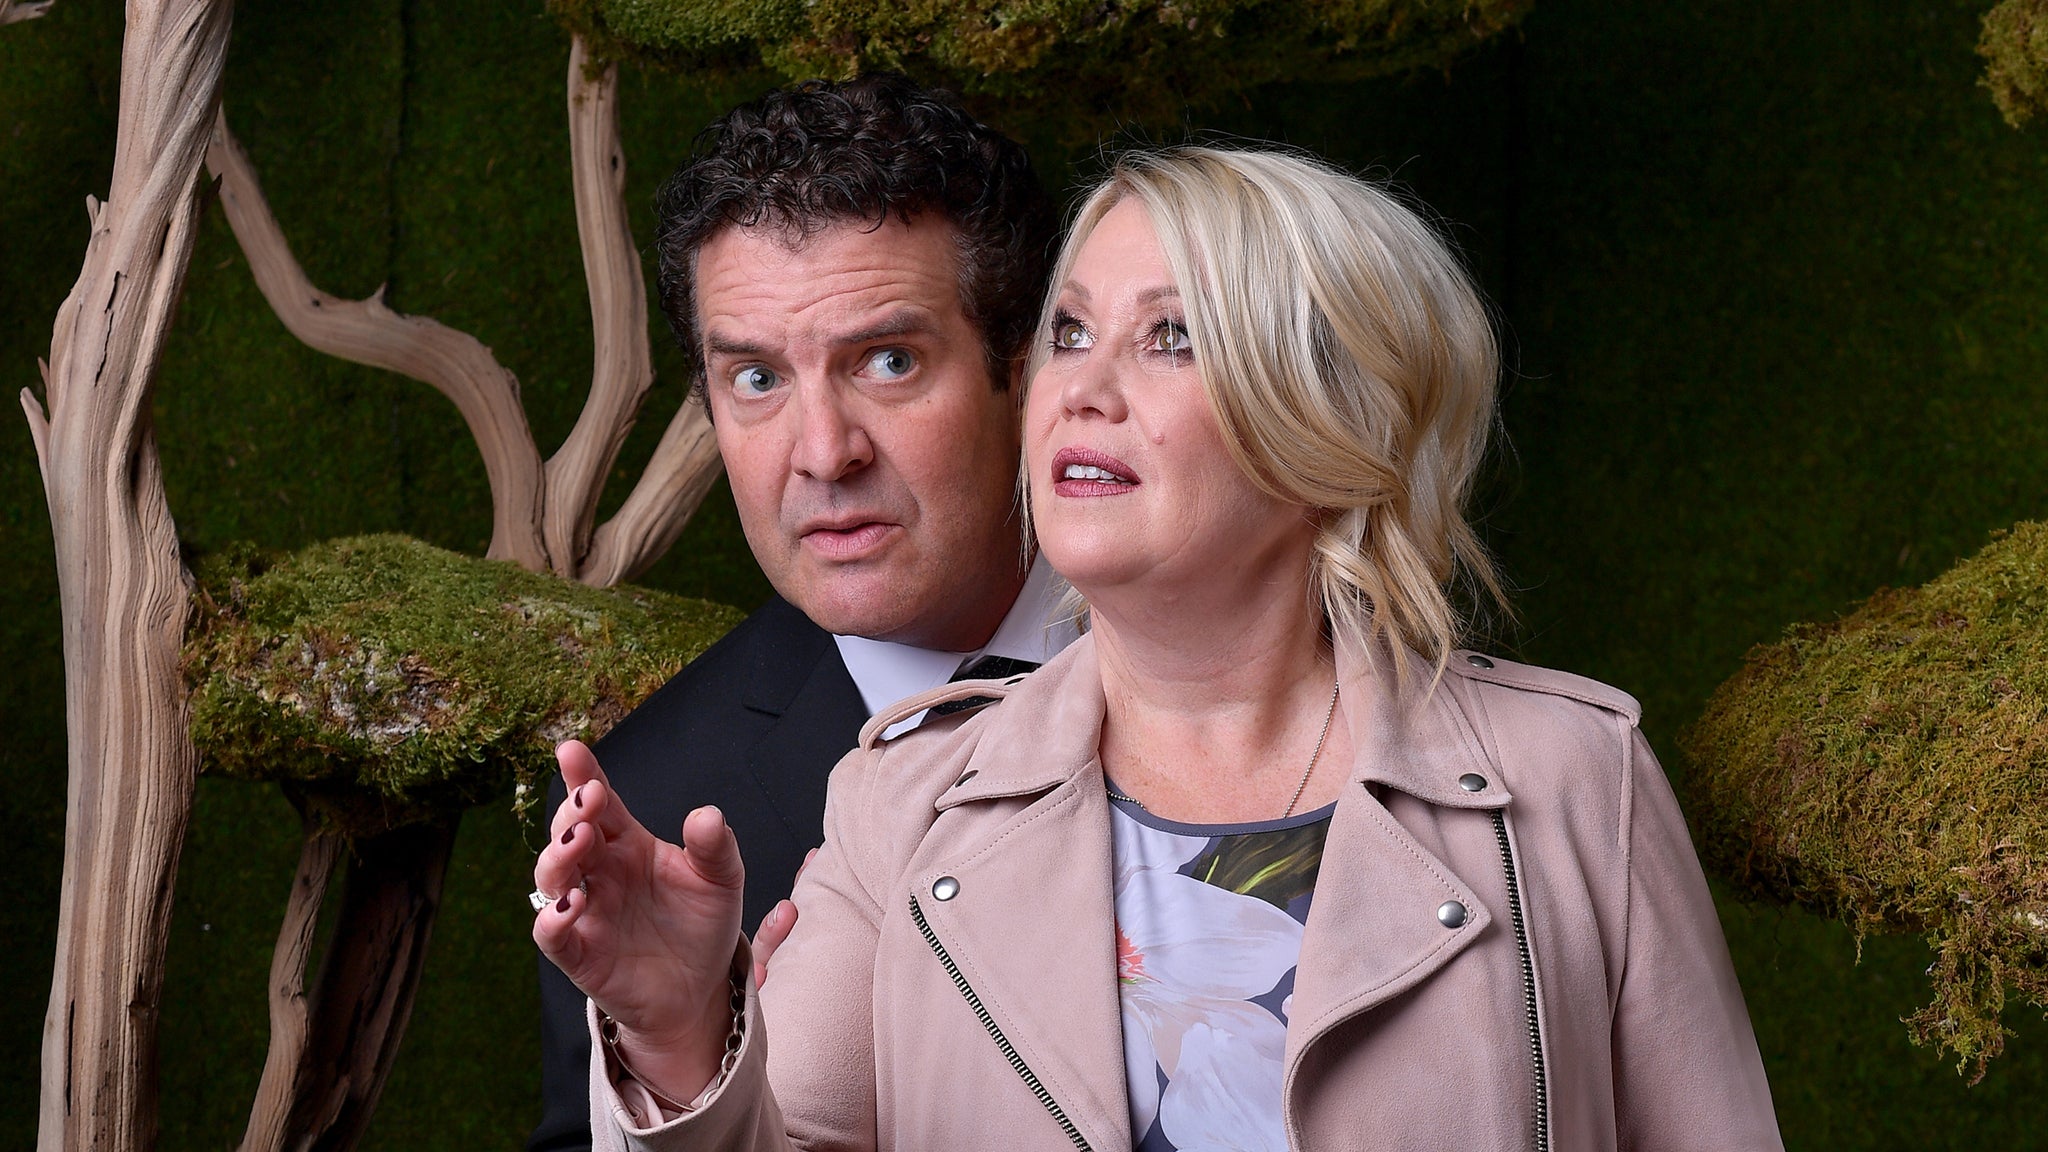 Jann Arden & Rick Mercer: The Will They or Won't They Tour